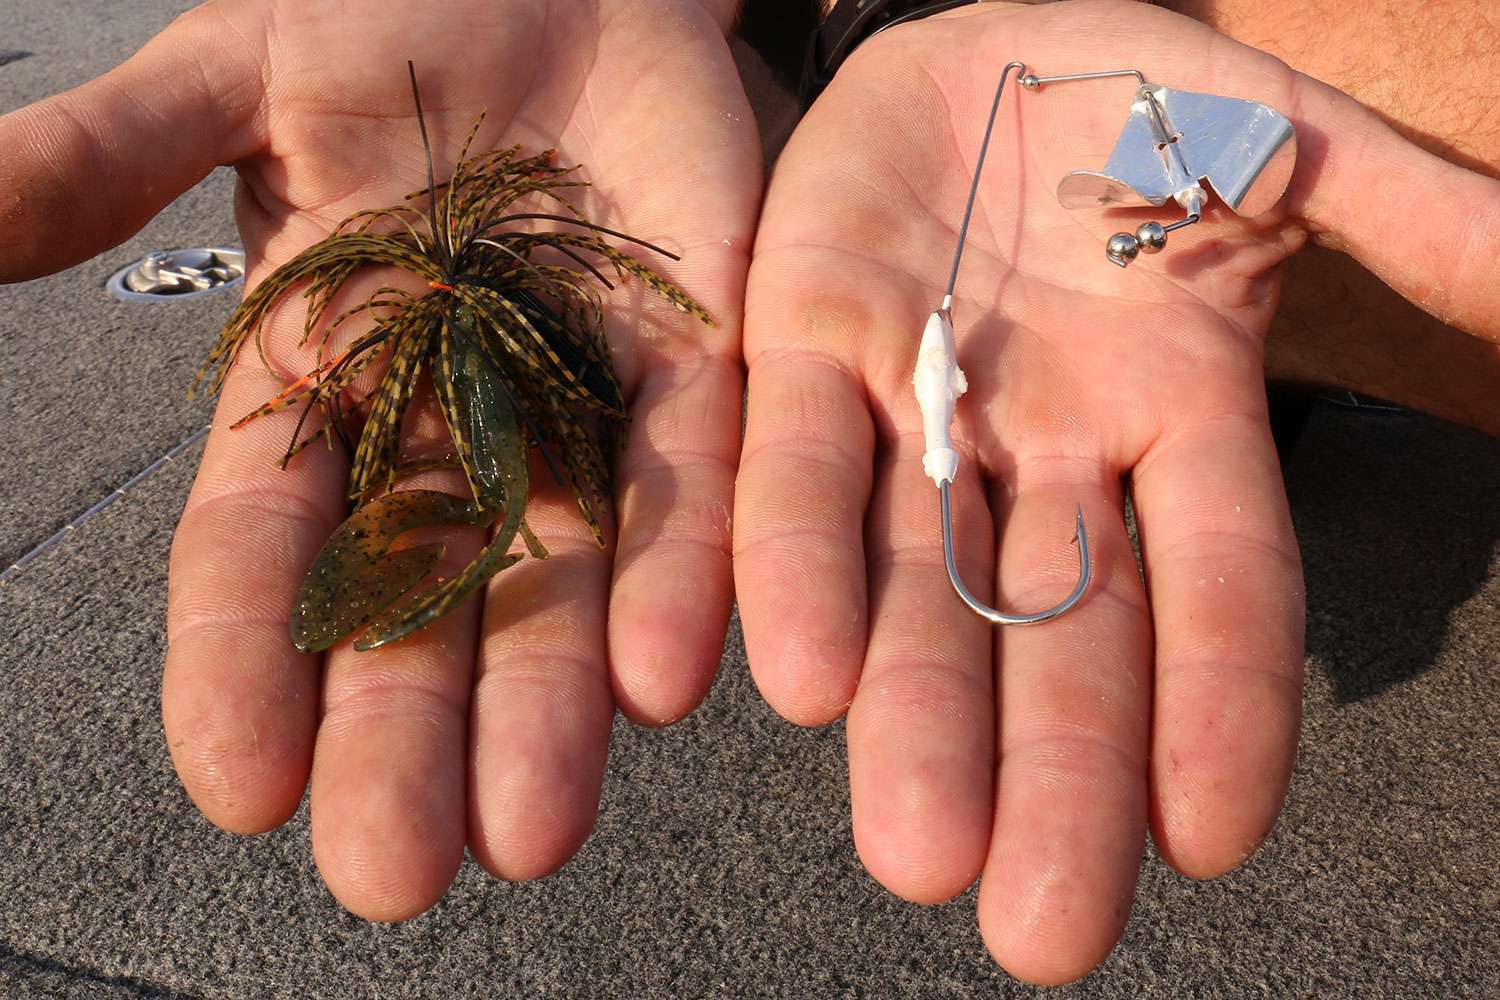 A top choice was a 3/8-ounce Stanley Ball Buster Buzzbait. He replaced the skirt with a 3.5-inch Stanley Ribbit for added strike appeal. He also chose a 1/2-ounce Stanley Jig with a 4-inch Biwaa Fishing Performance Warax crawfish trailer.  